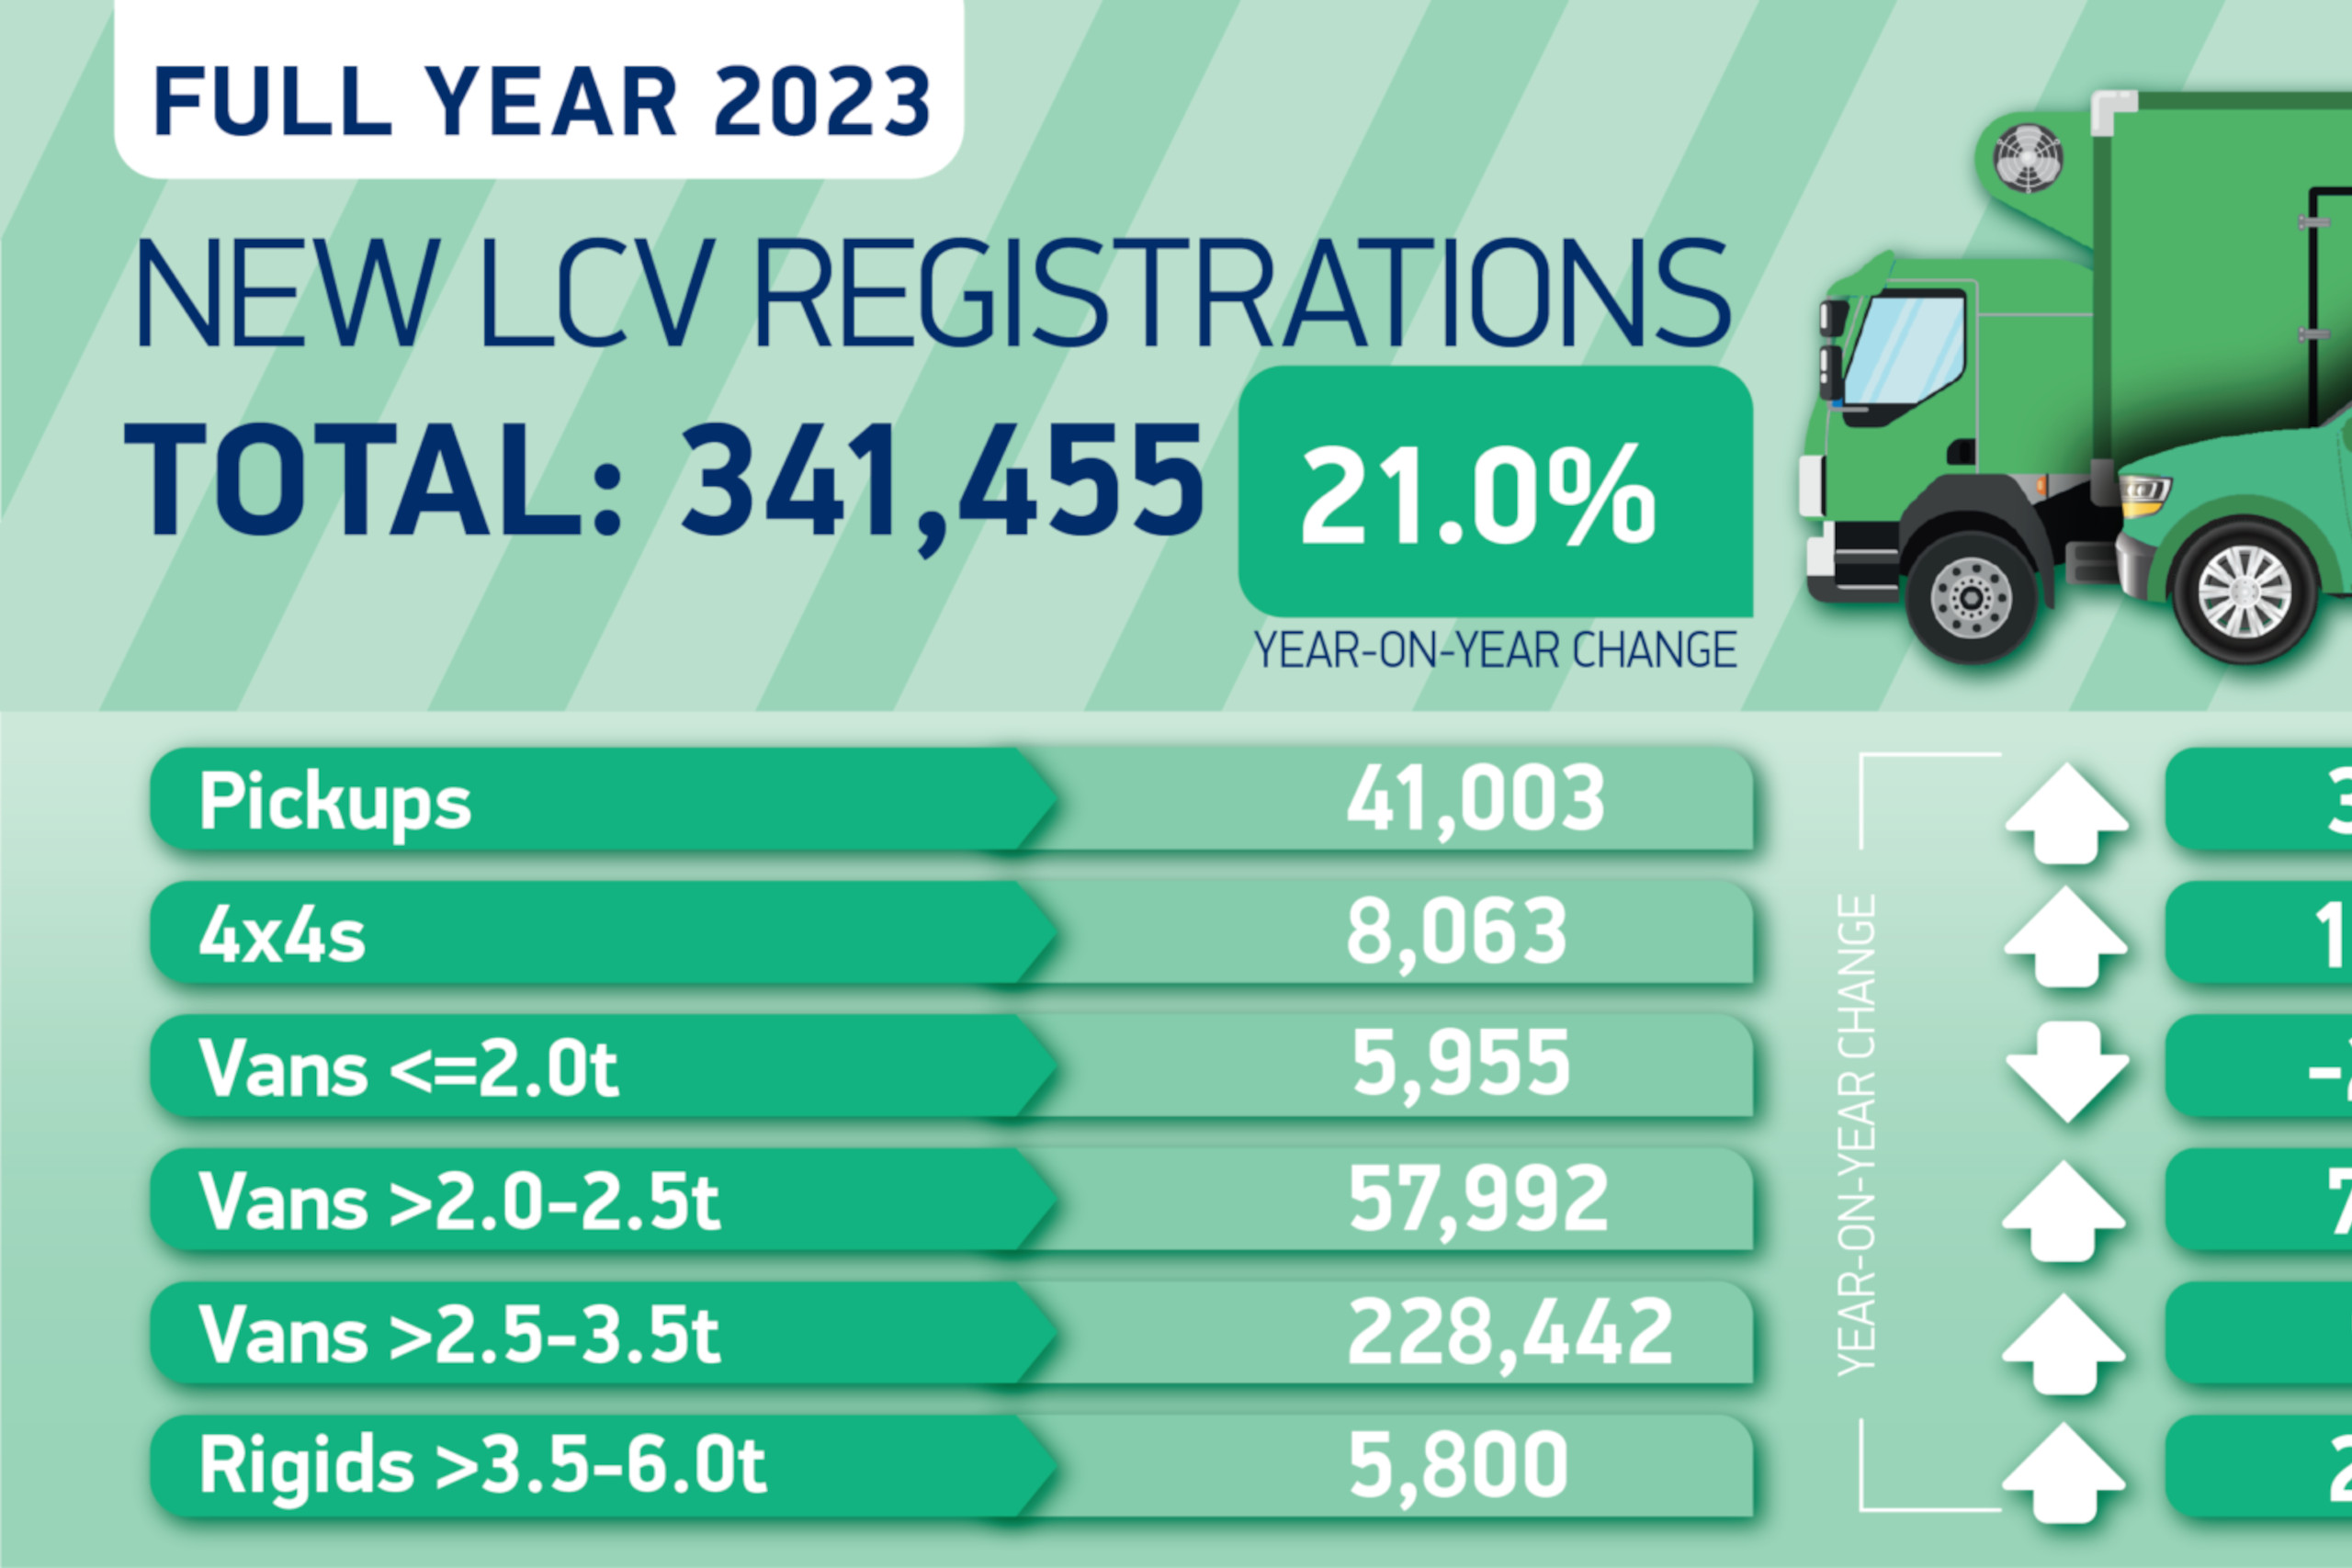 UK New LCV Registrations – 2023 in Review